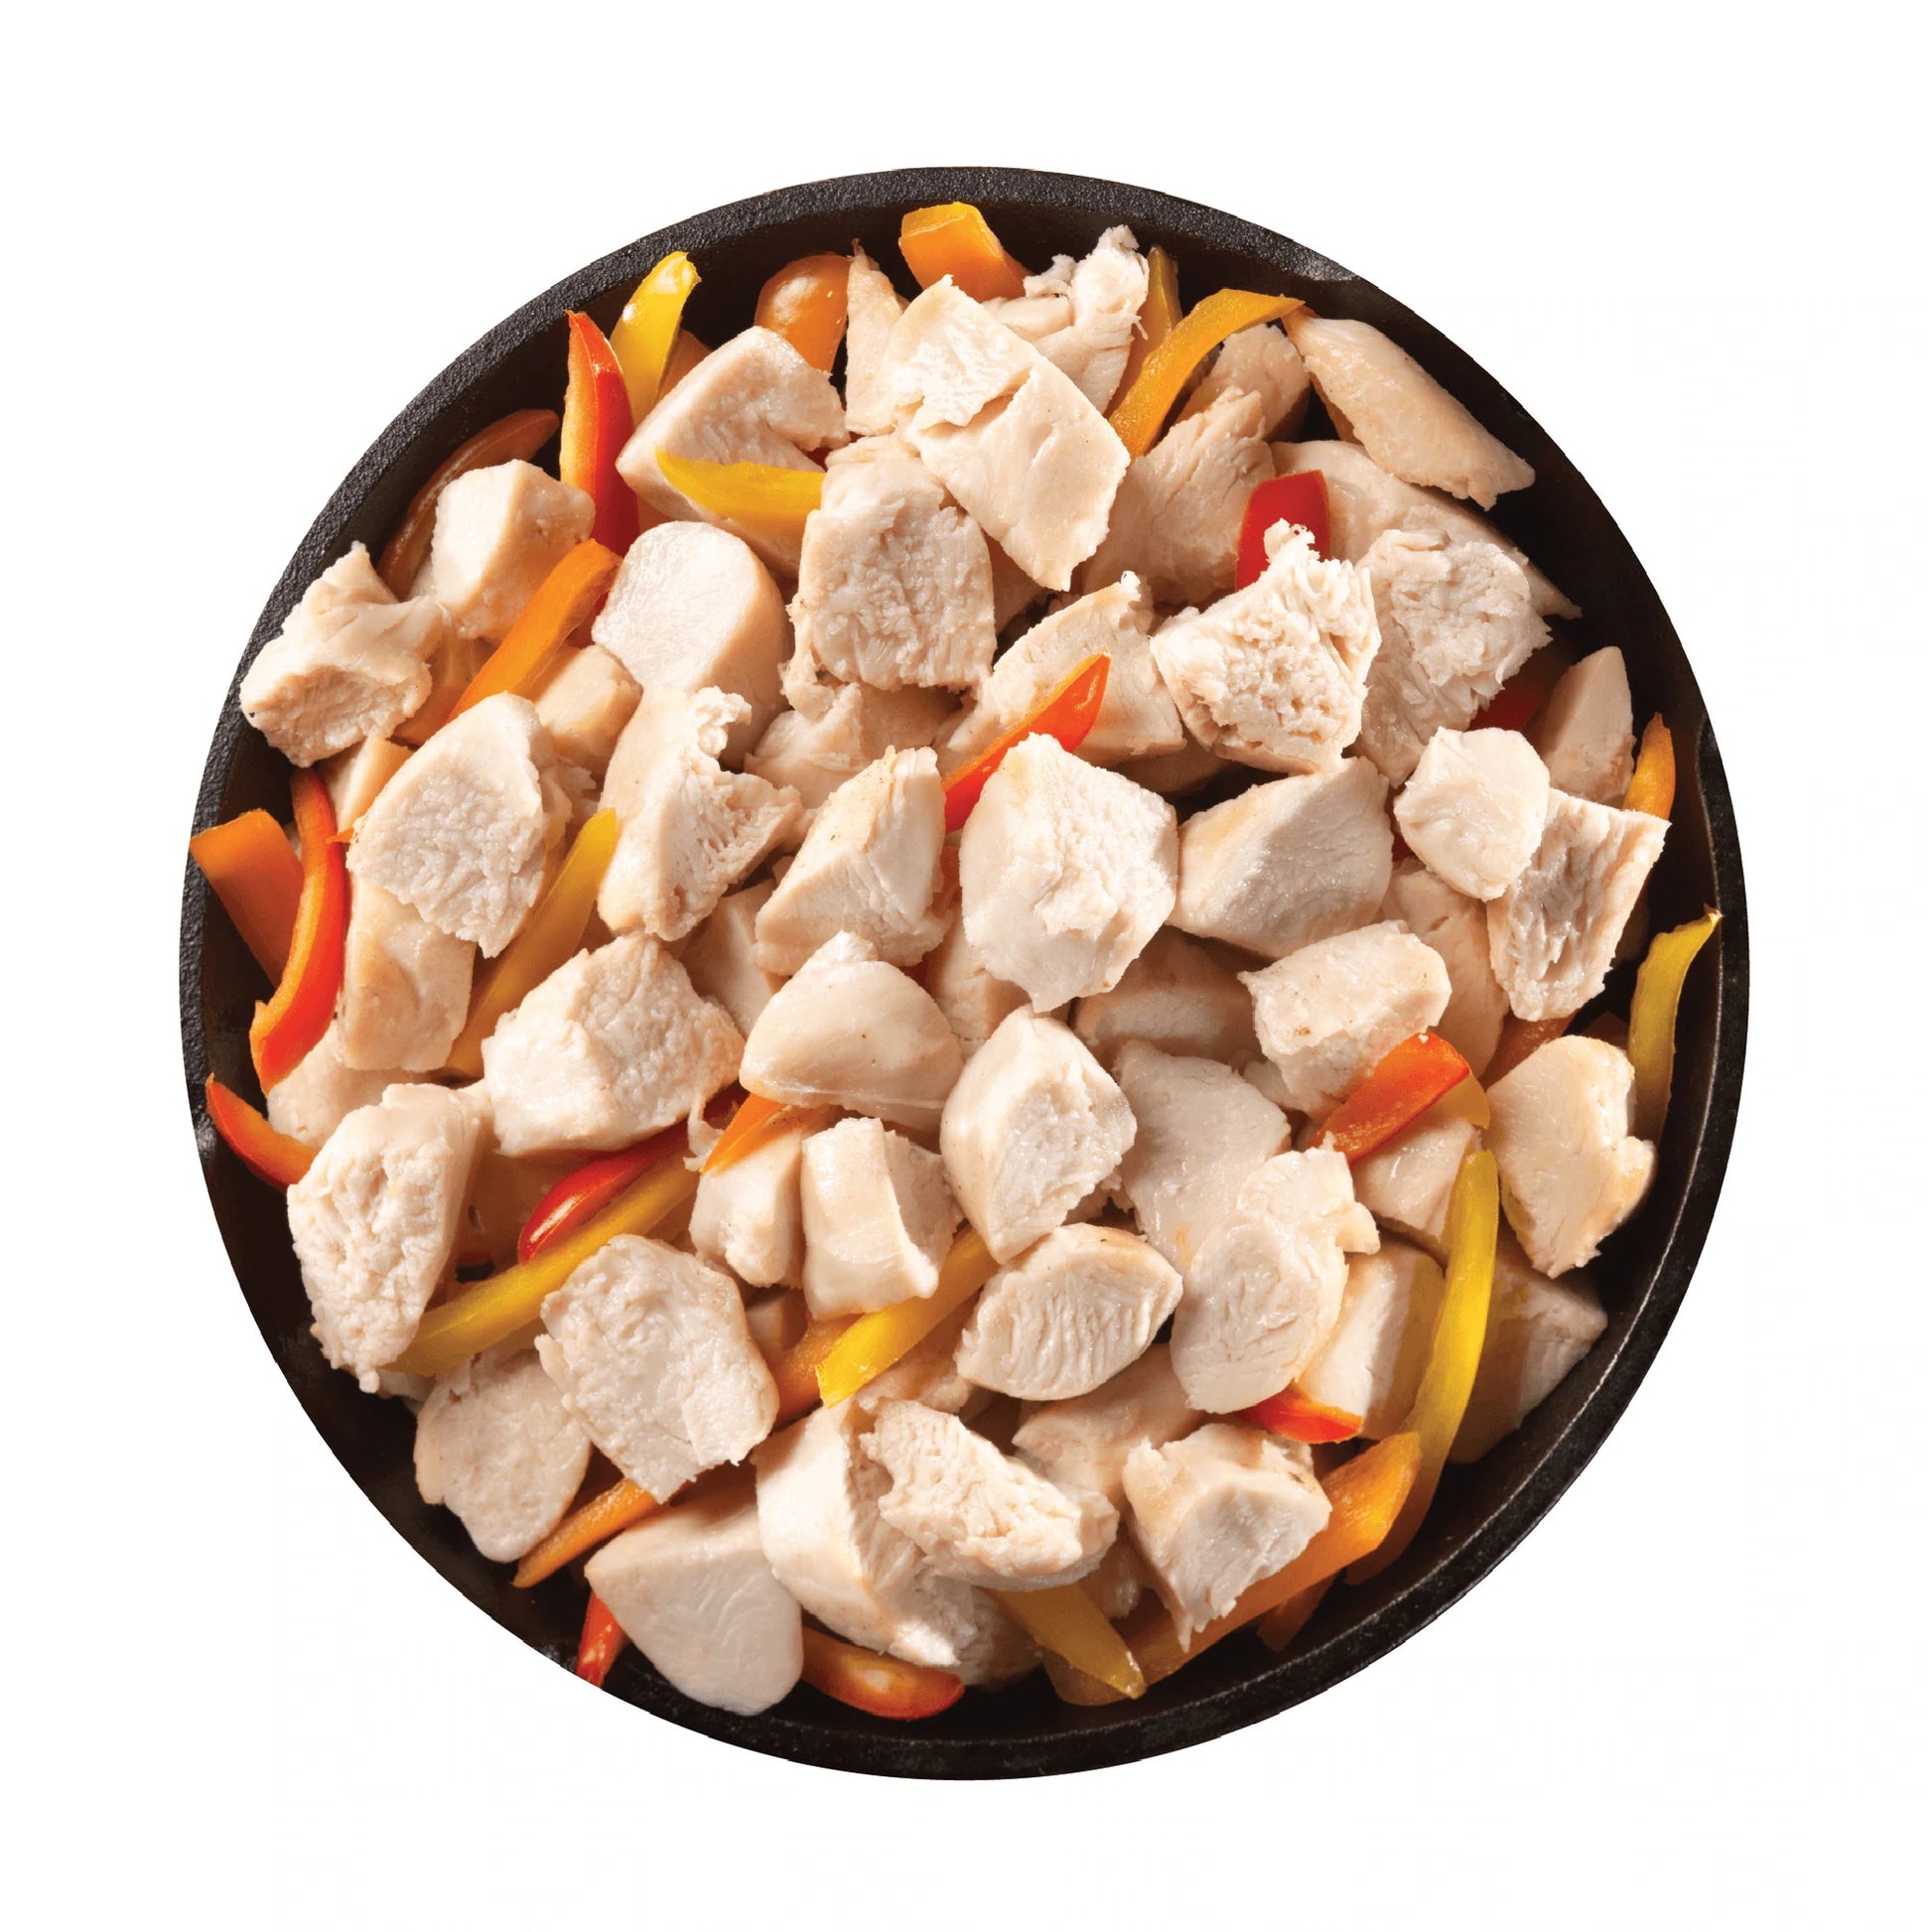 MH Cooked Diced Chicken FD 17 oz #10 BeReadyFoods.com